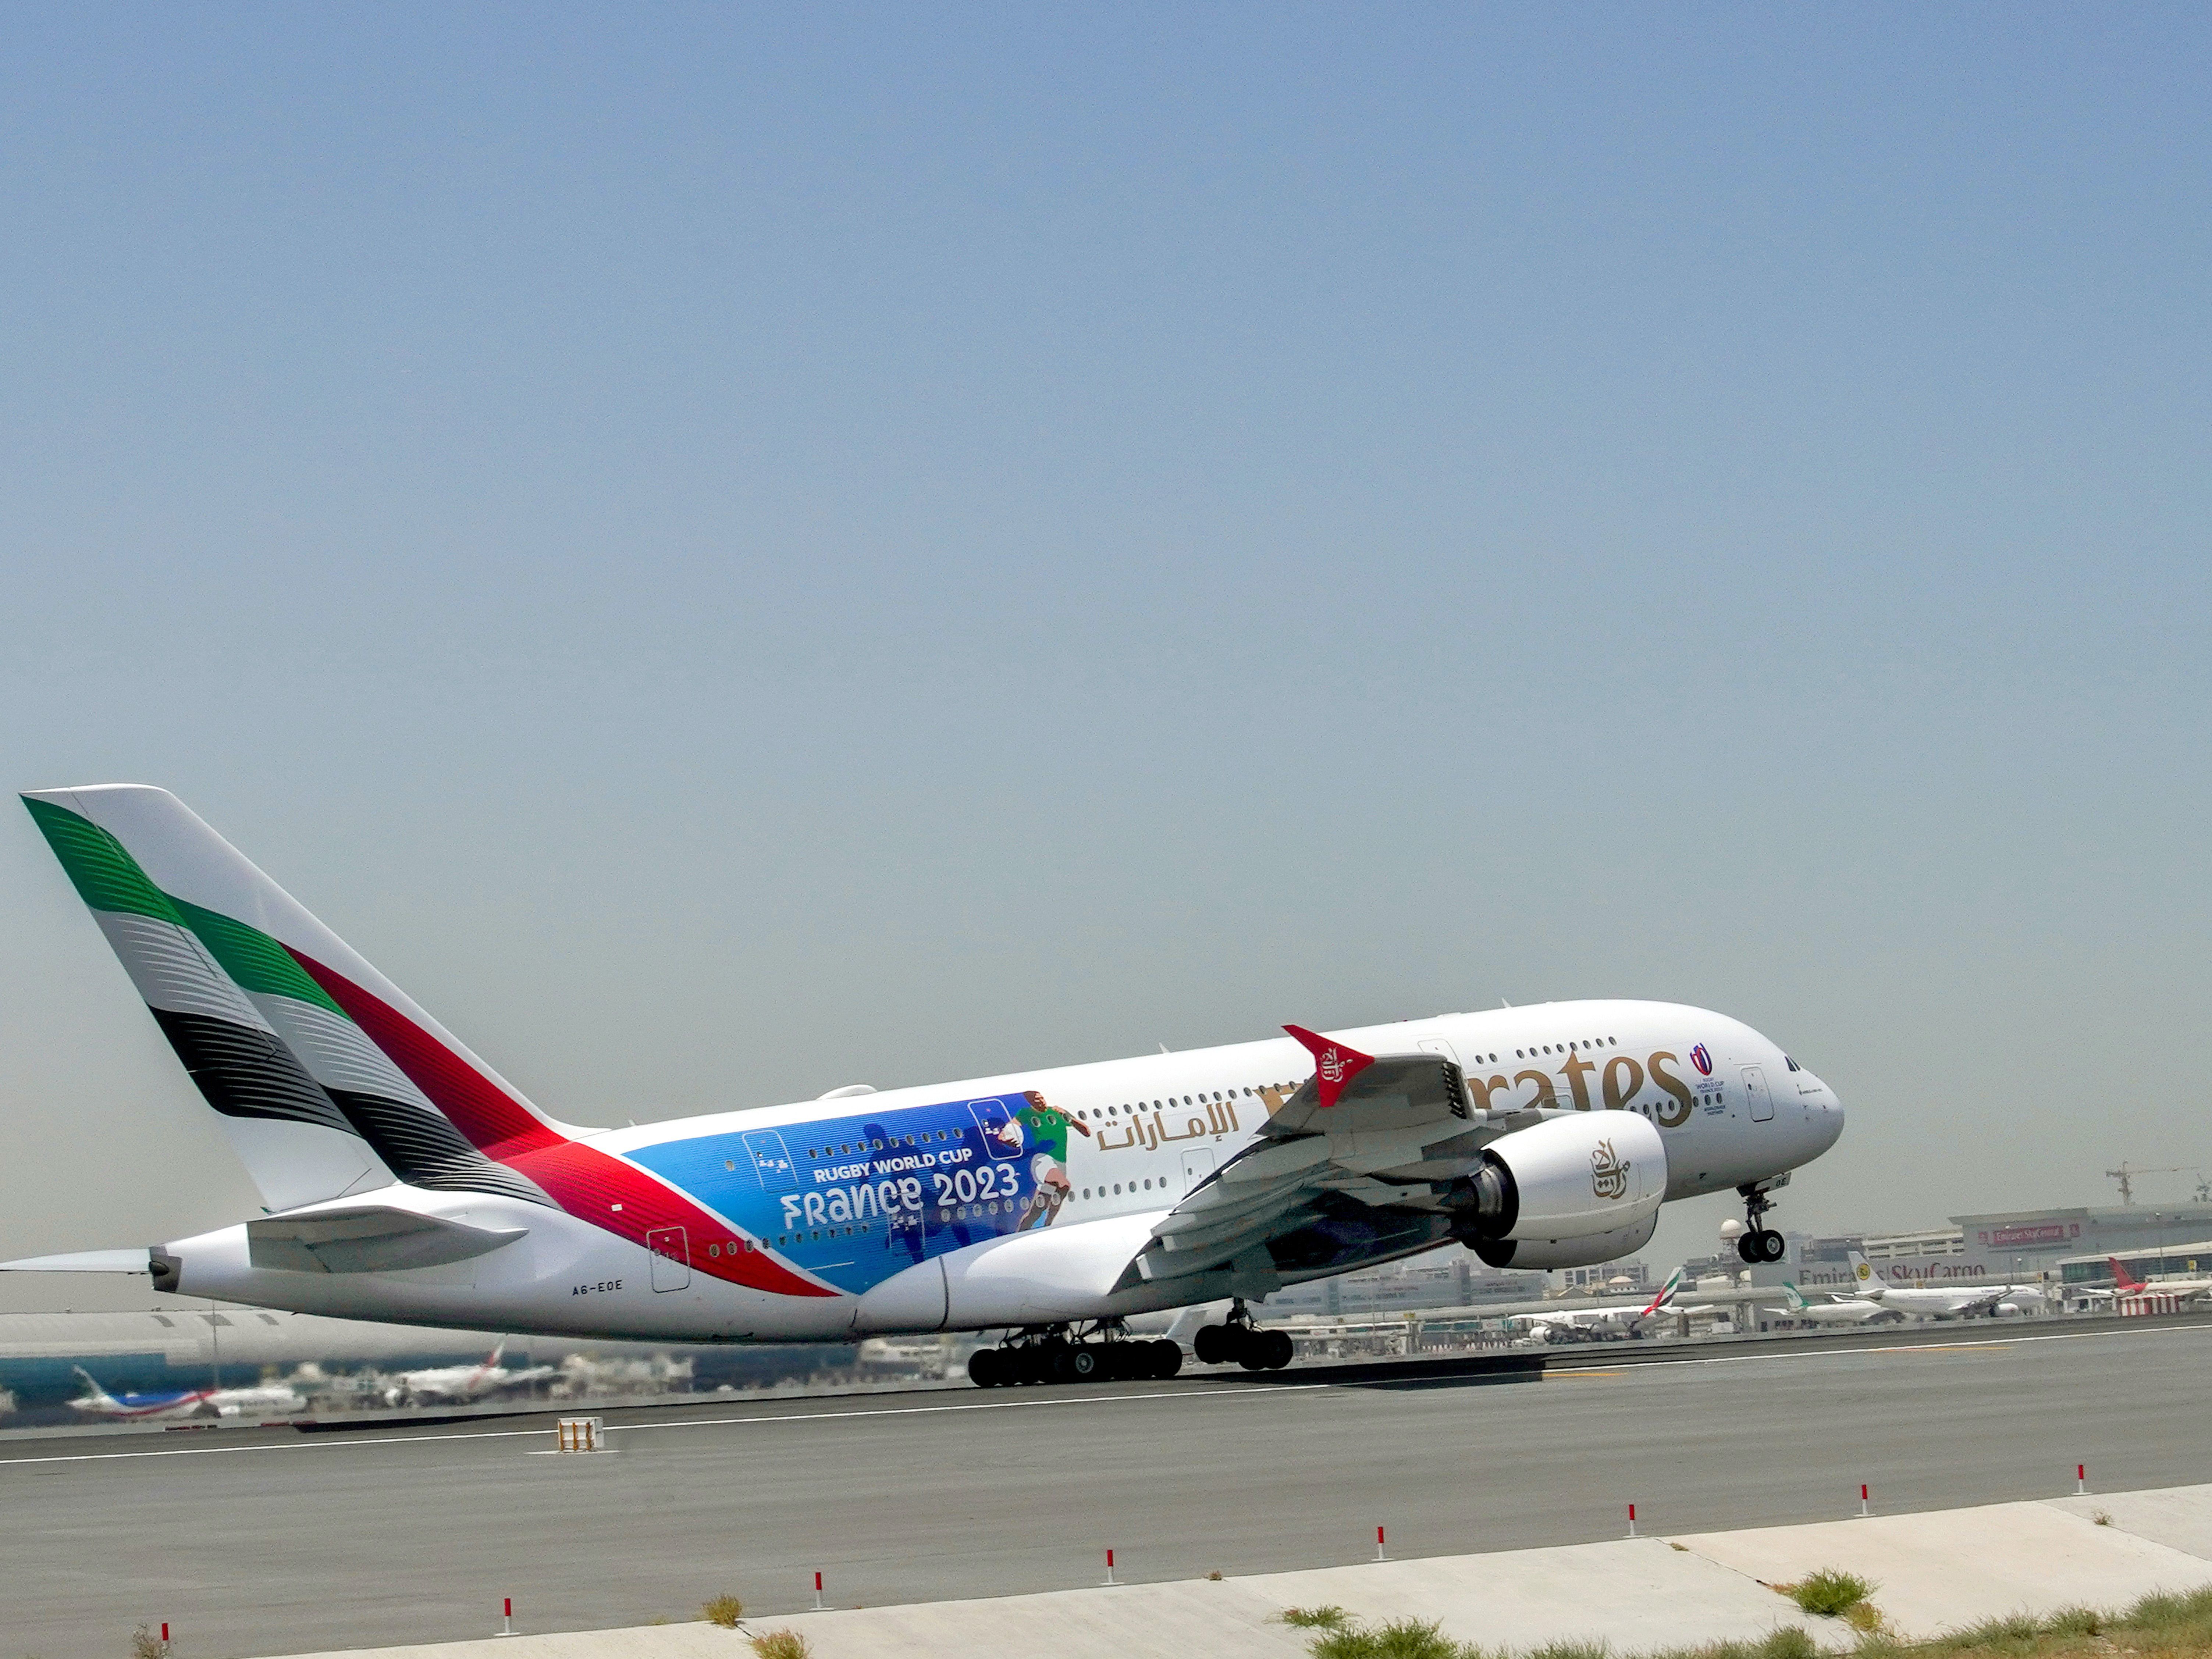 Emirates Rugby World Cup livery